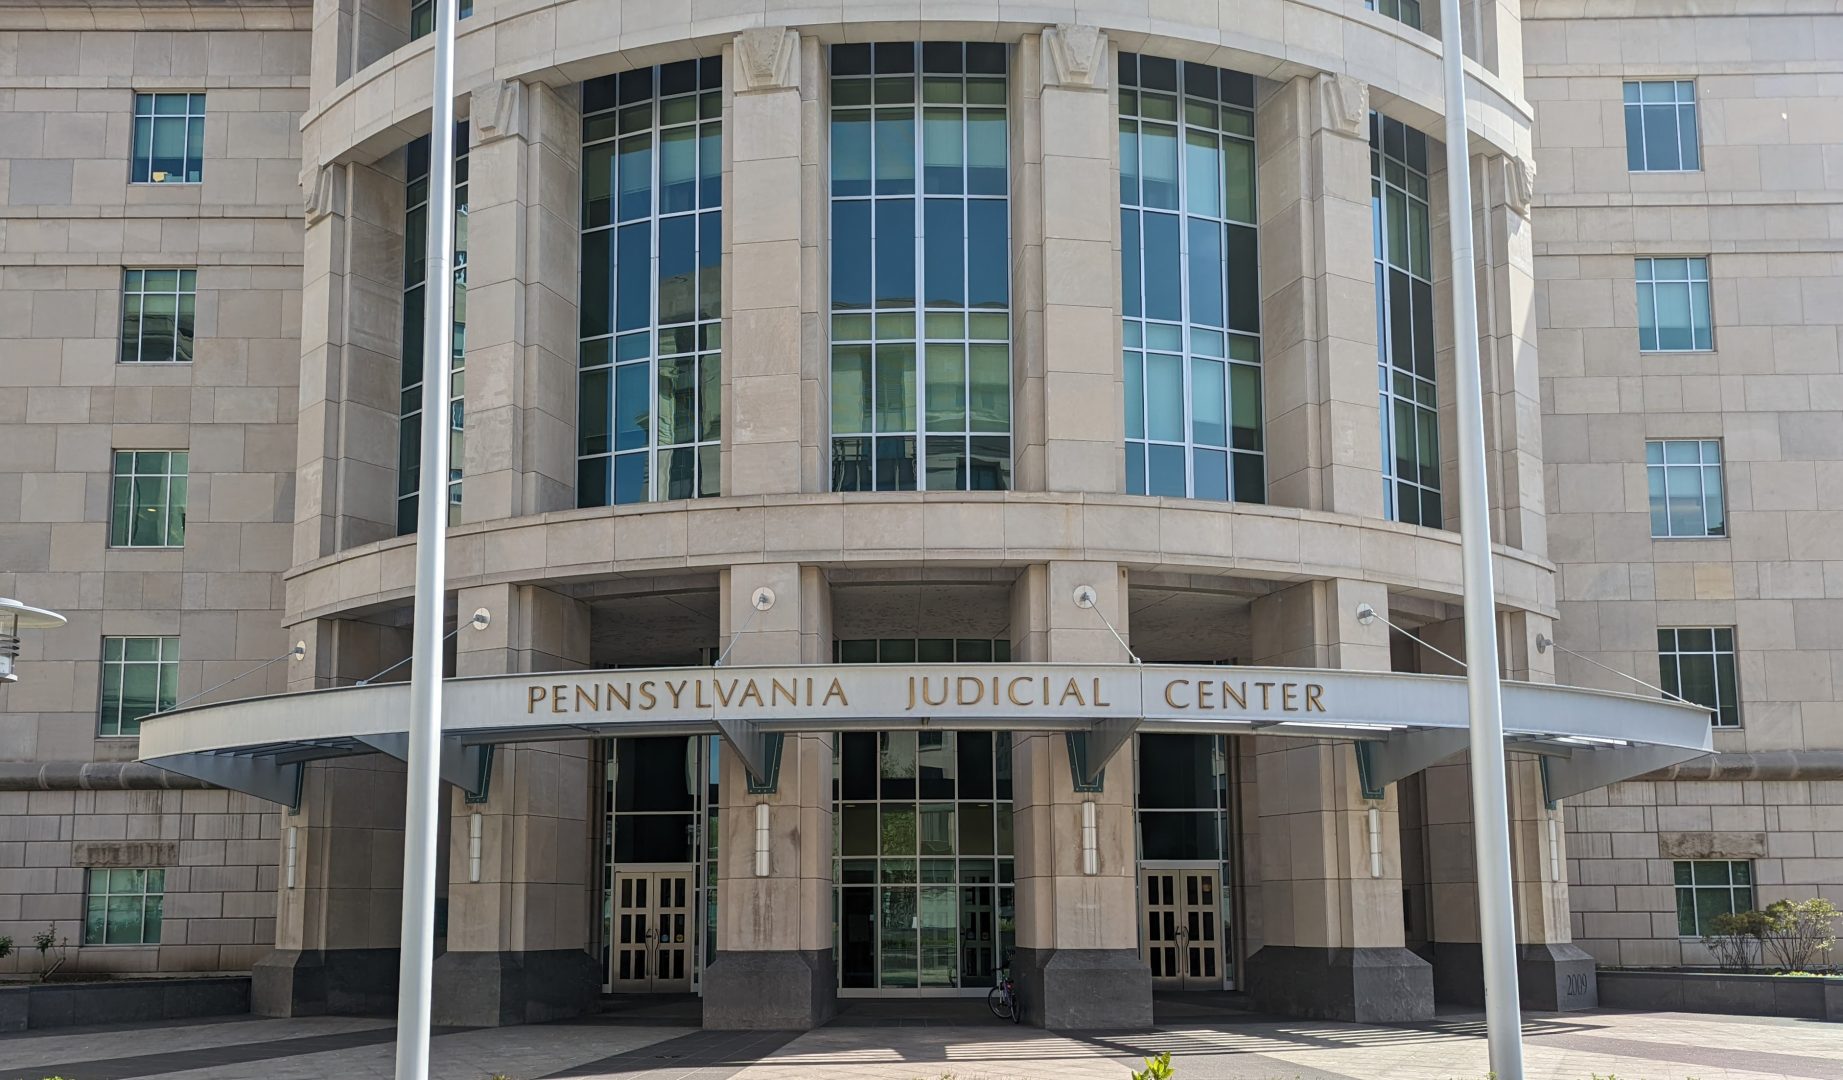 The Pennsylvania Judicial Center, which houses the Commonwealth Court, is seen here on May 5, 2022.